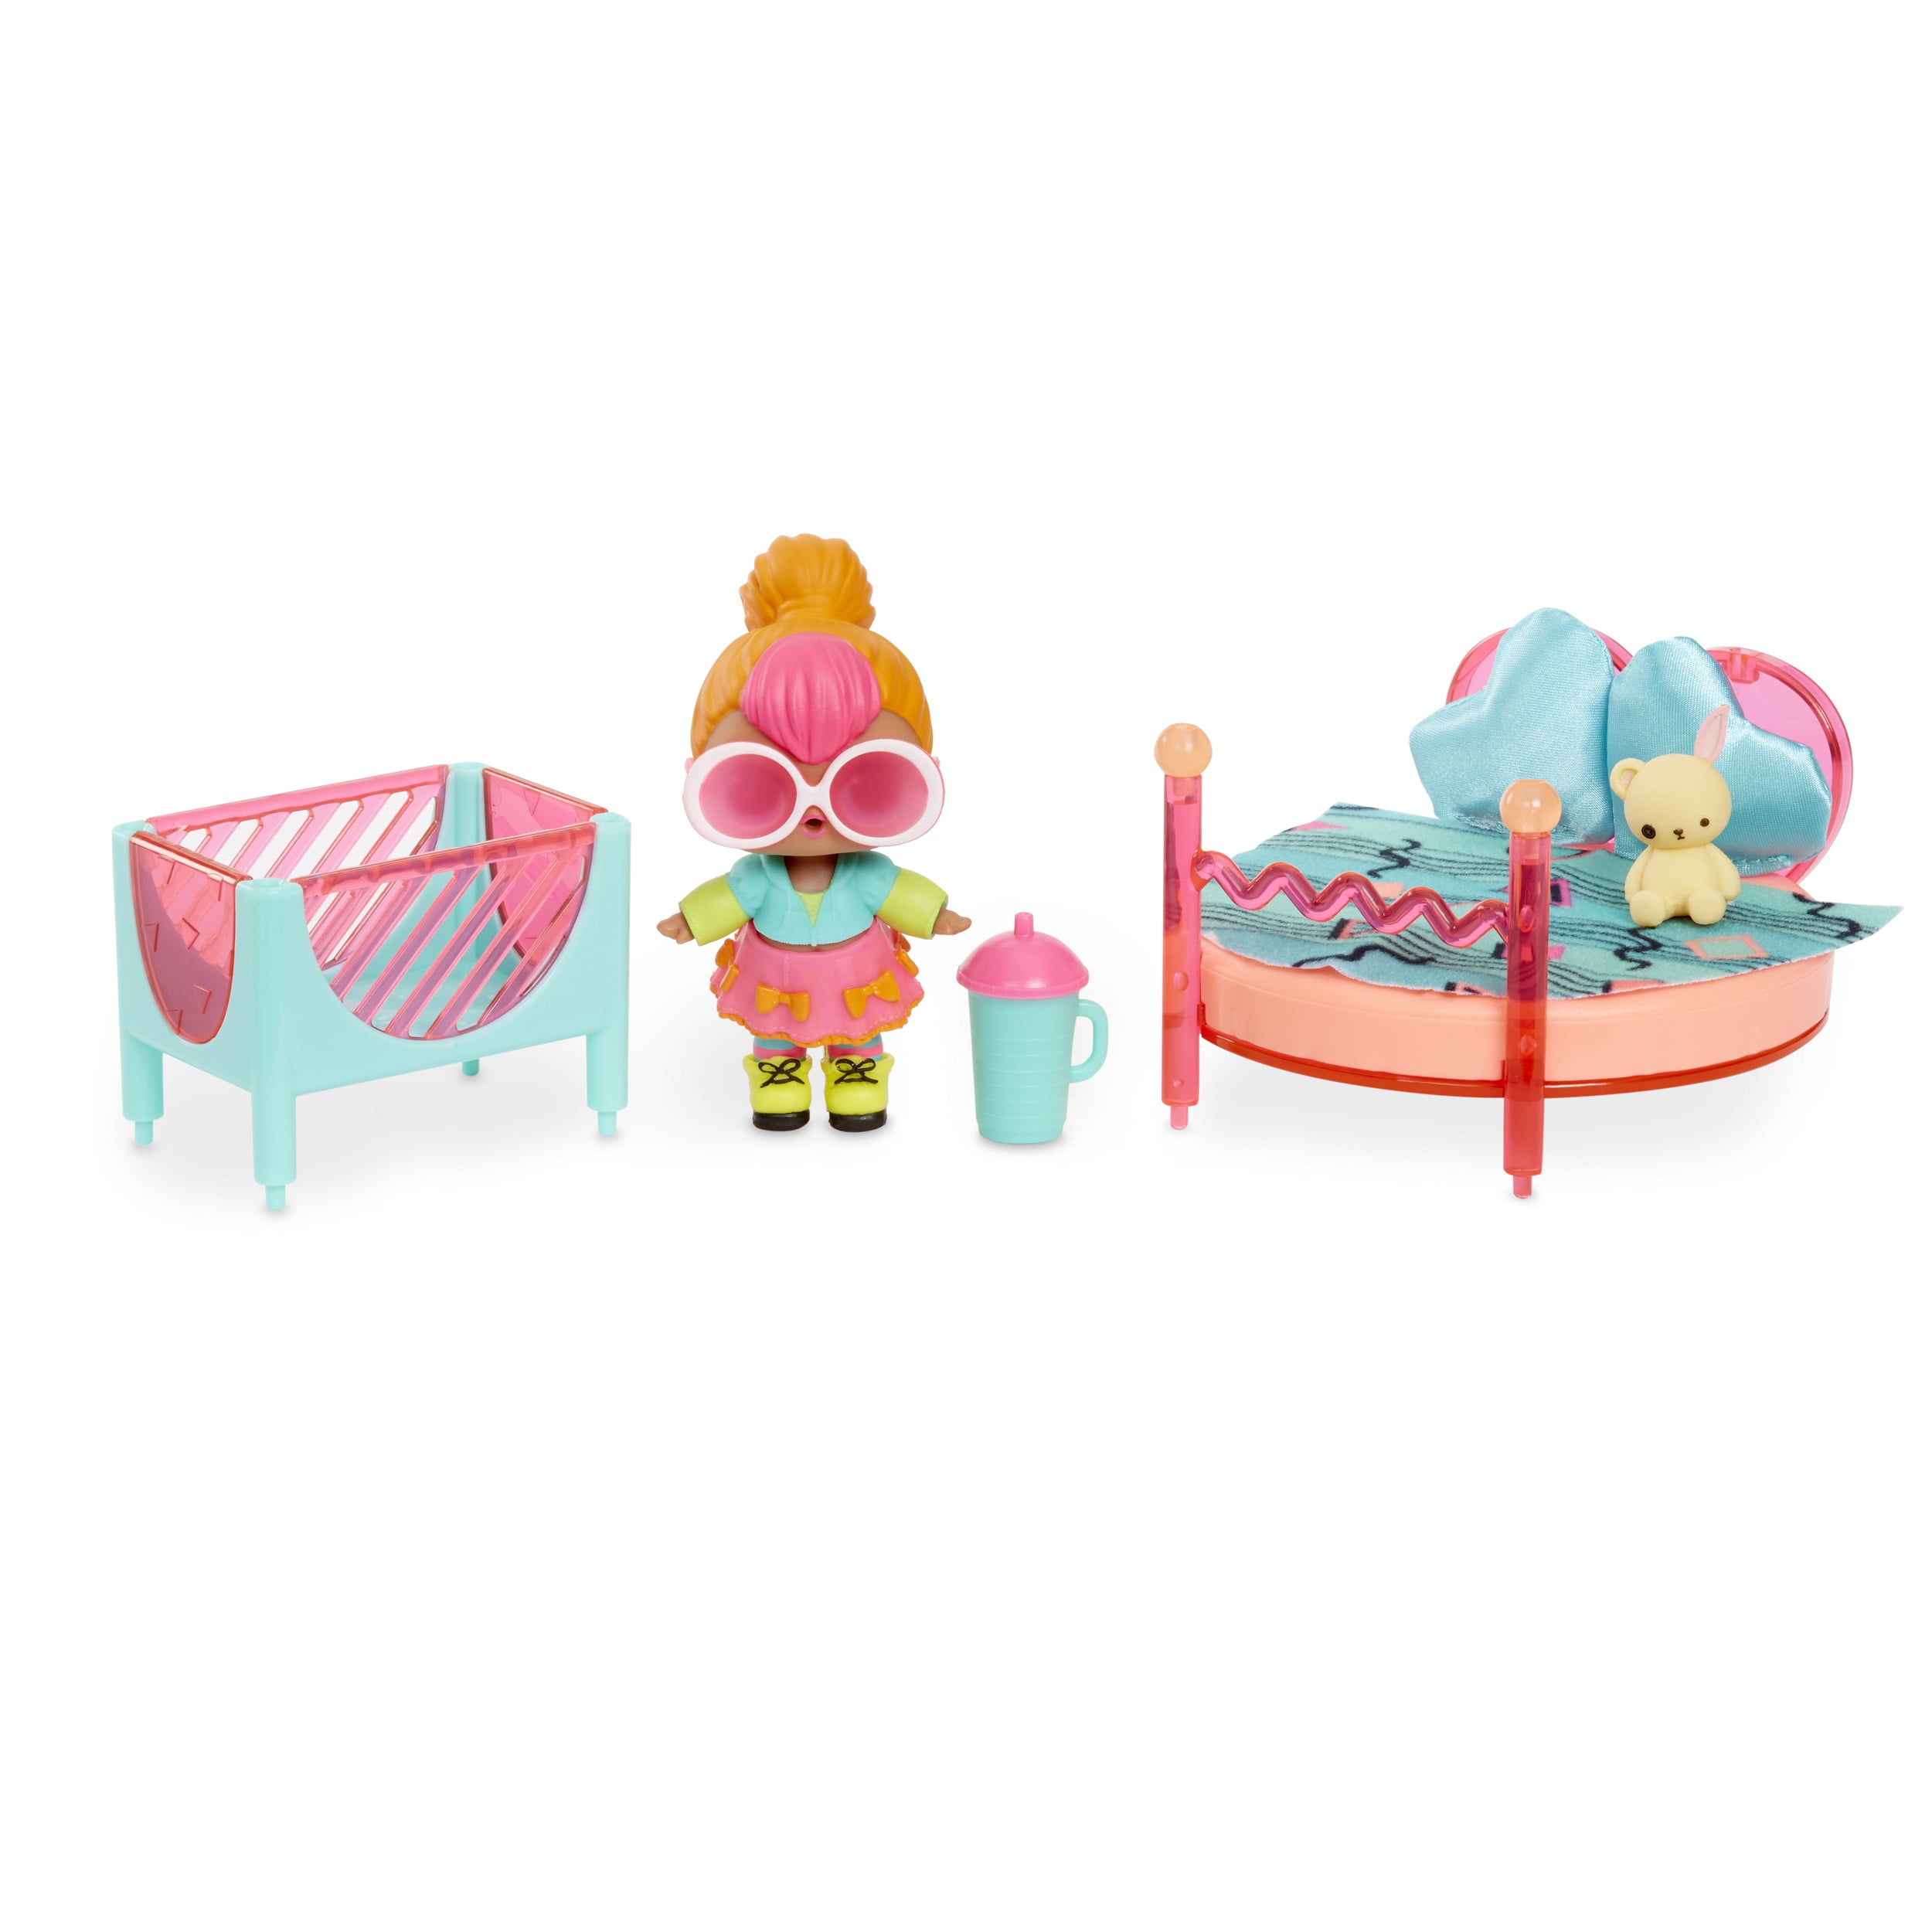 LOL SURPRISE FURNITURE SPACES BEDROOM PLAYSET WITH NEON Q.T DOLL 